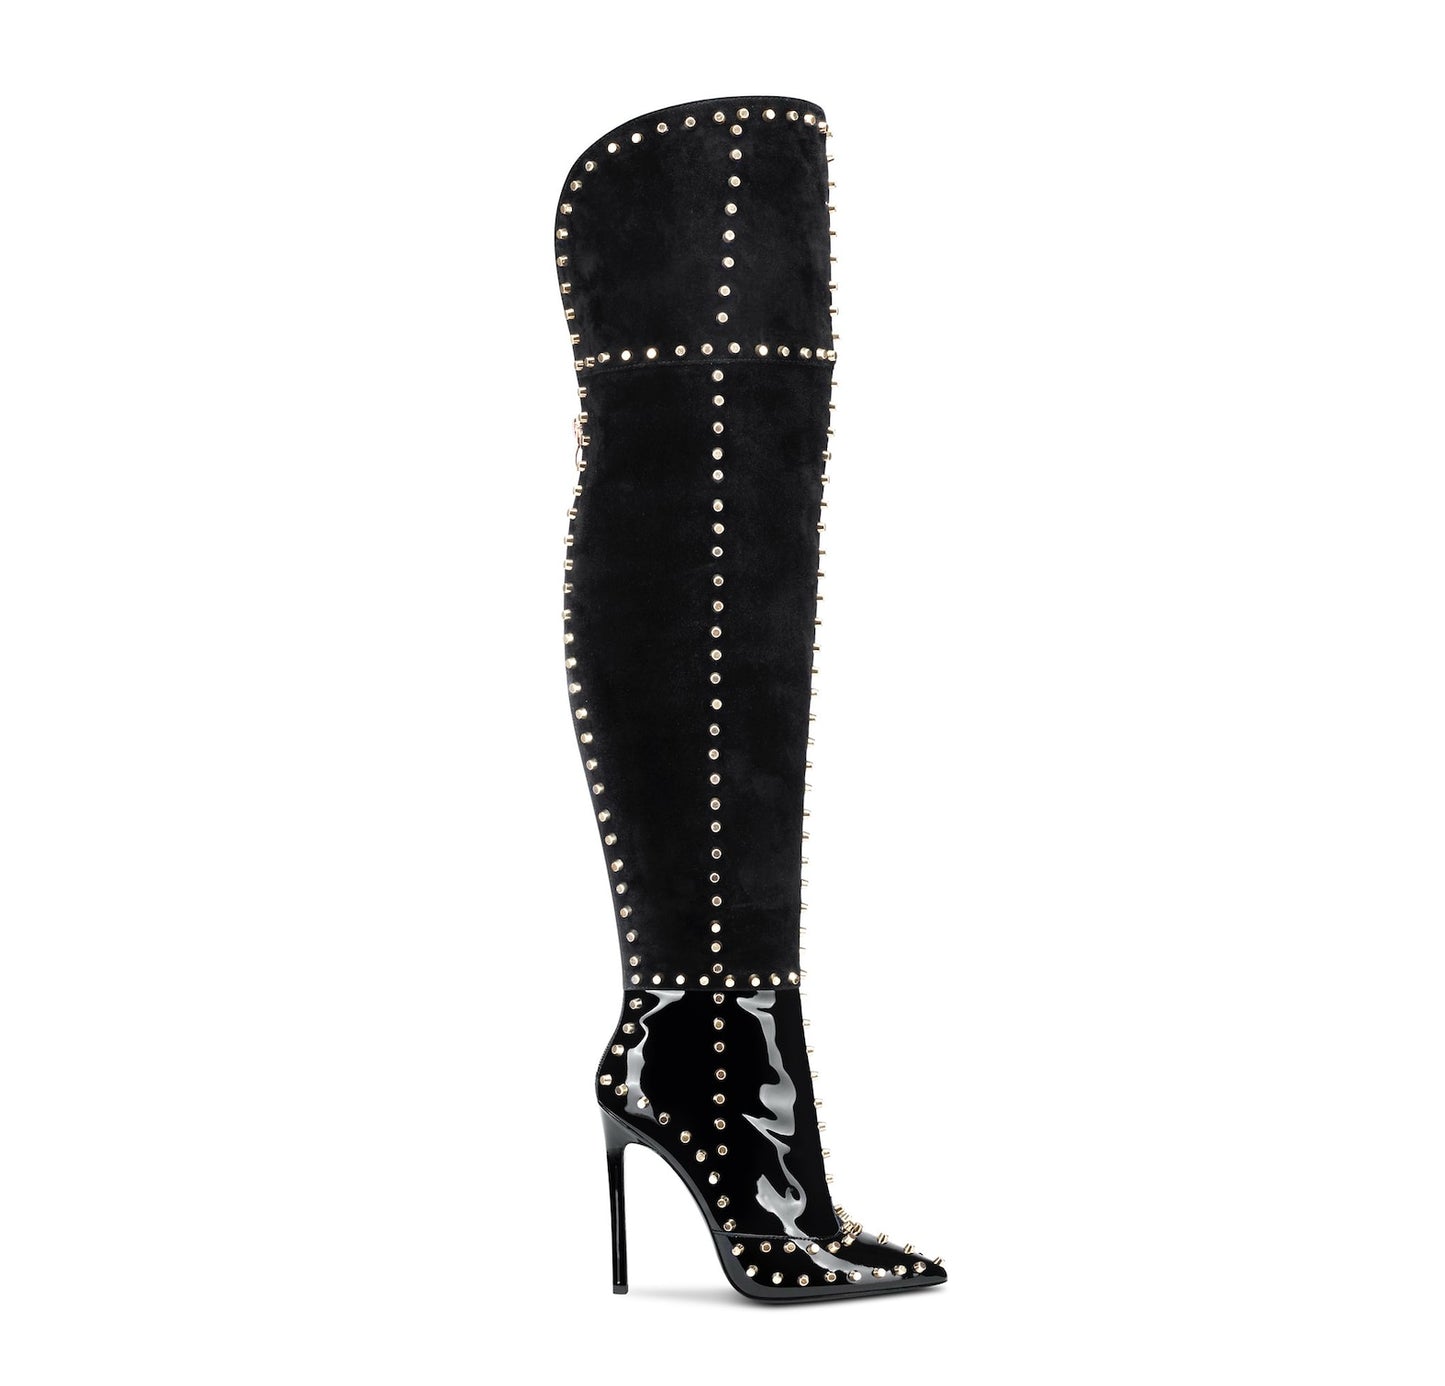 Villa Blvd Over The Knee Gladiator Boots ☛ Multiple Colors Available ☚